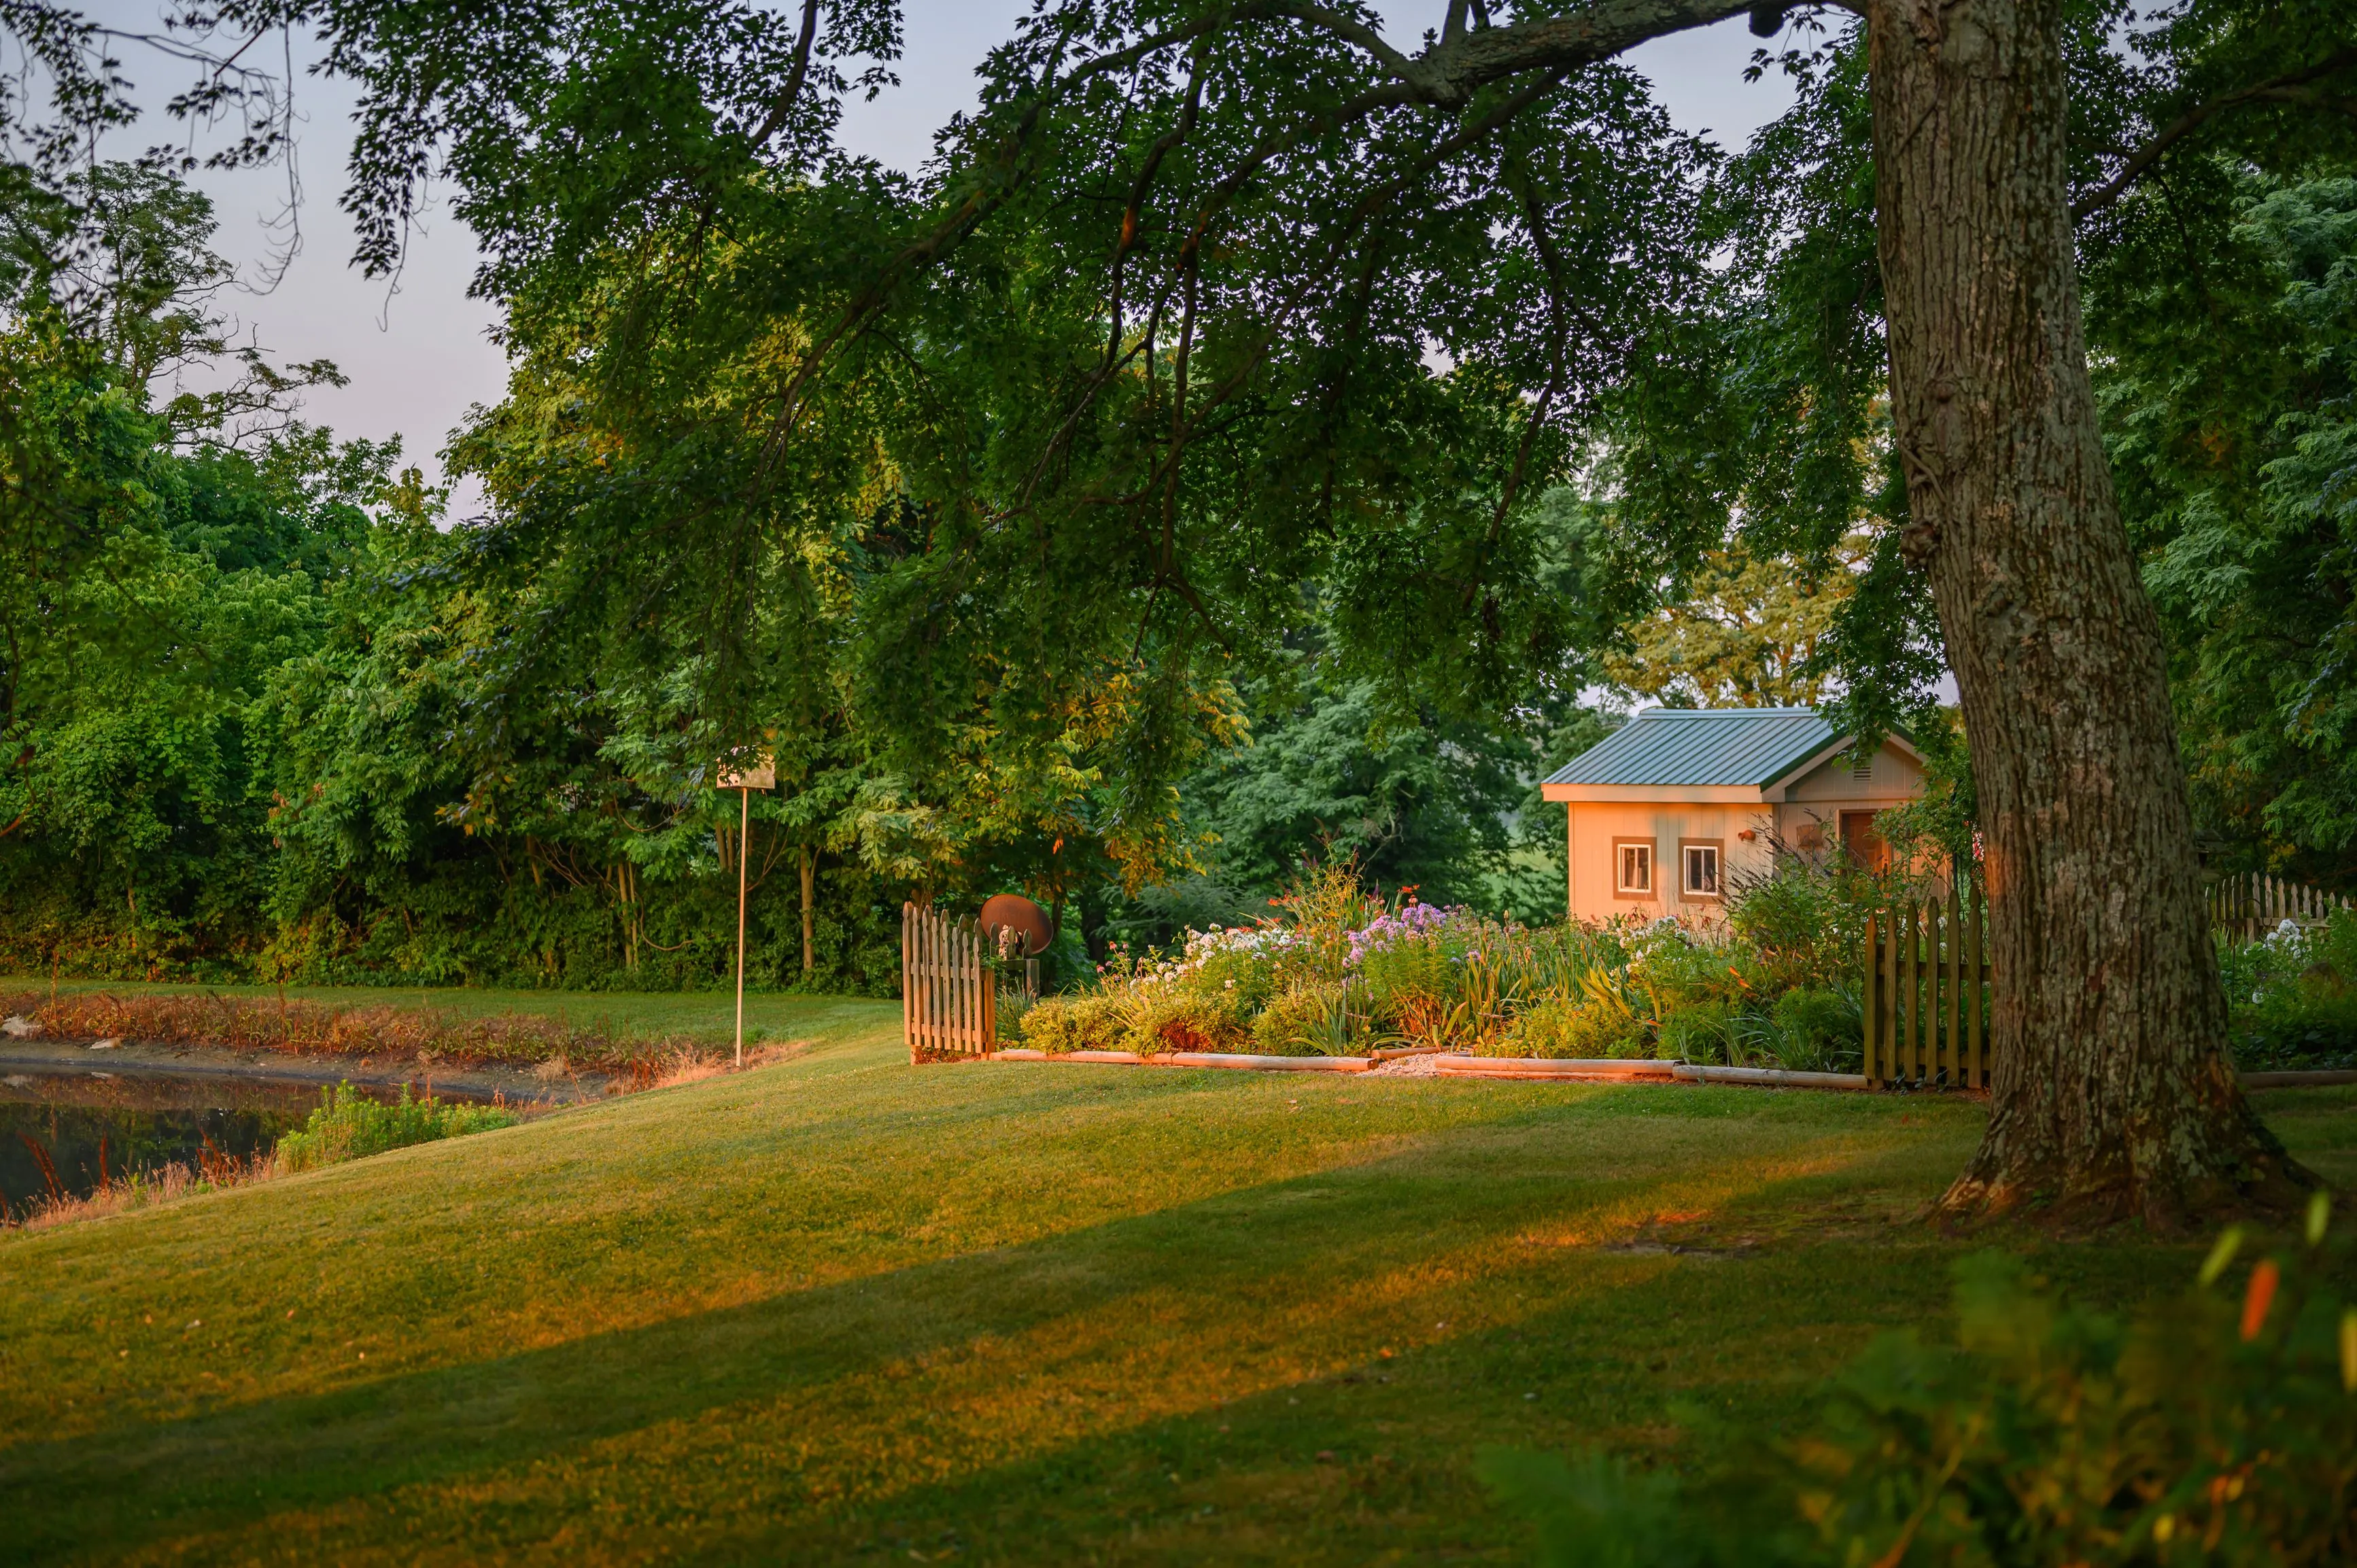 Idyllic garden scene with lush greenery, a blooming flowerbed, a wooden bench, and a small garden shed during golden hour sunlight.